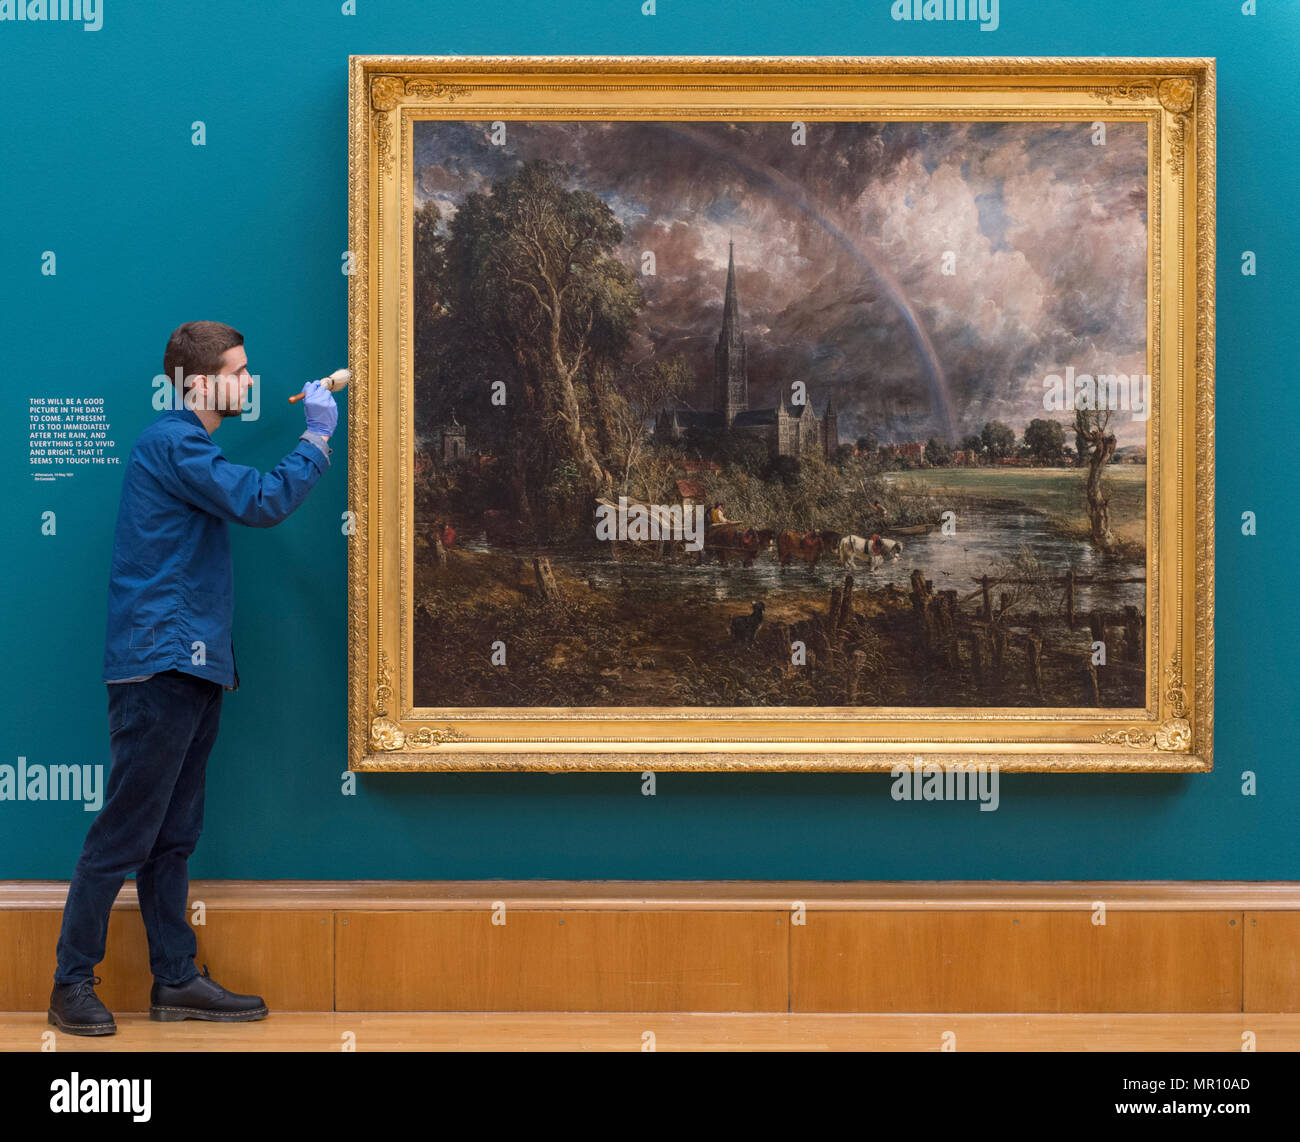 Tate Britain, London, UK. 25 May, 2018. Constable’s Salisbury Cathedral from the Meadows 1831 is shown alongside Turner’s Caligula’s Palace and Bridge, also 1831, in a new display, Fire and Water, marking the first pairing of these two works since they were exhibited over 180 years ago. Credit: Malcolm Park/Alamy Live News. Stock Photo